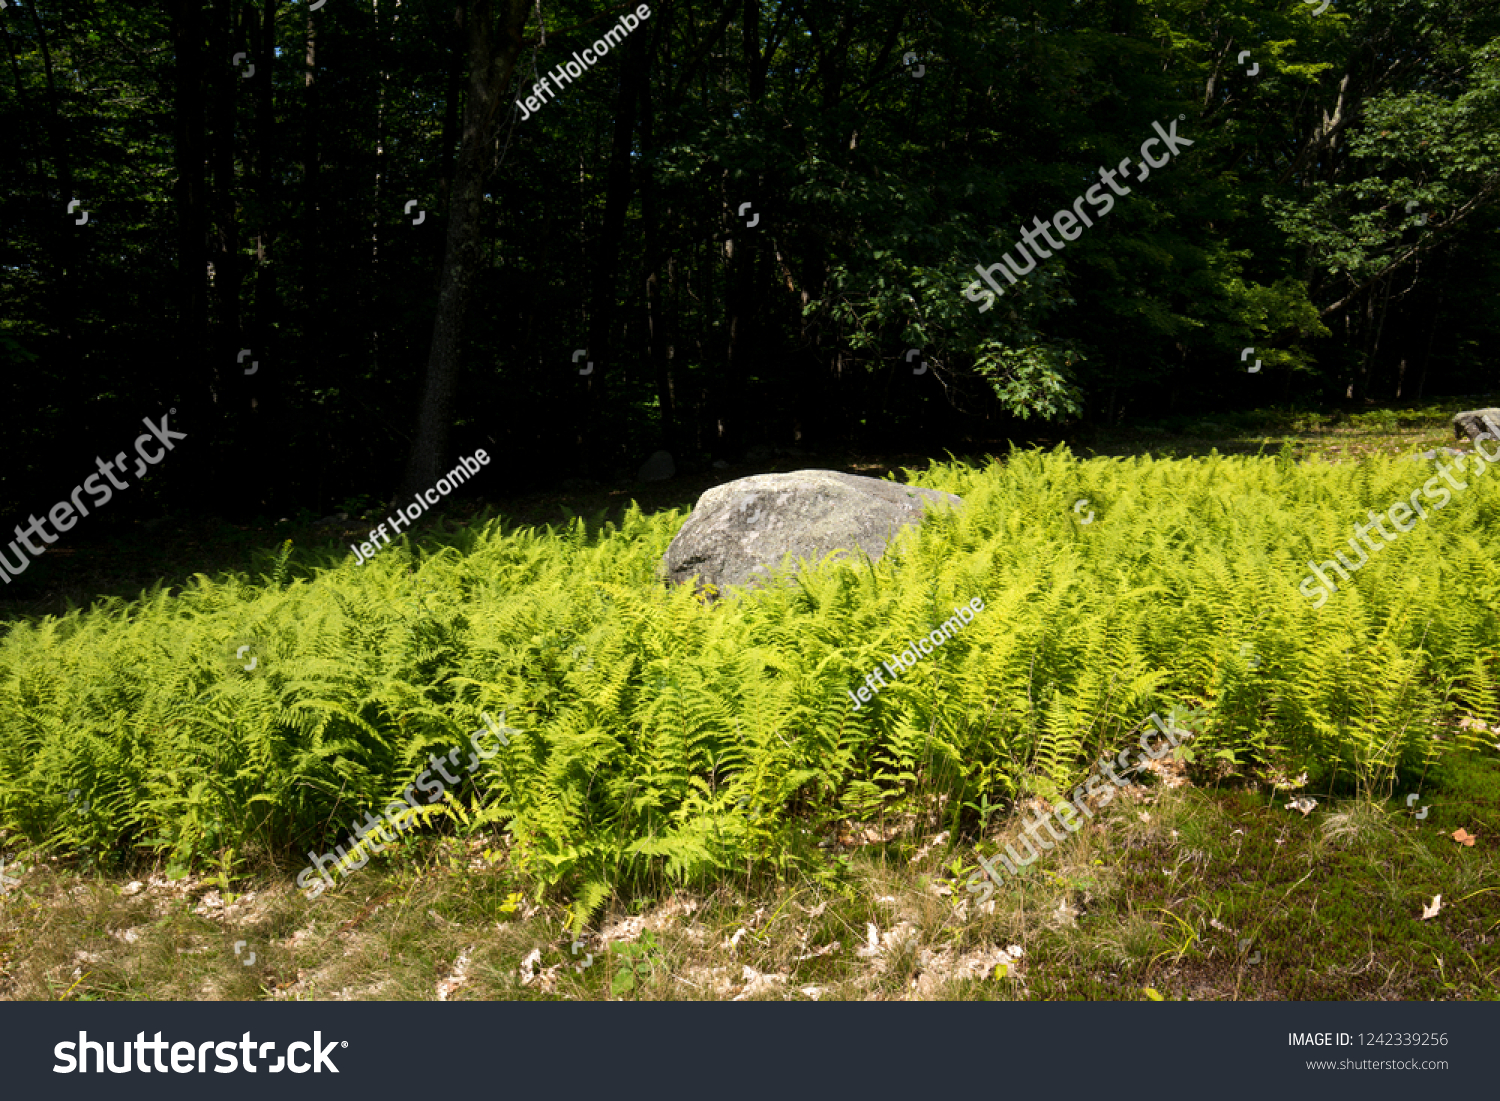 Green Summertime Leaves Wood Ferns Surround Stock Photo Edit Now 1242339256